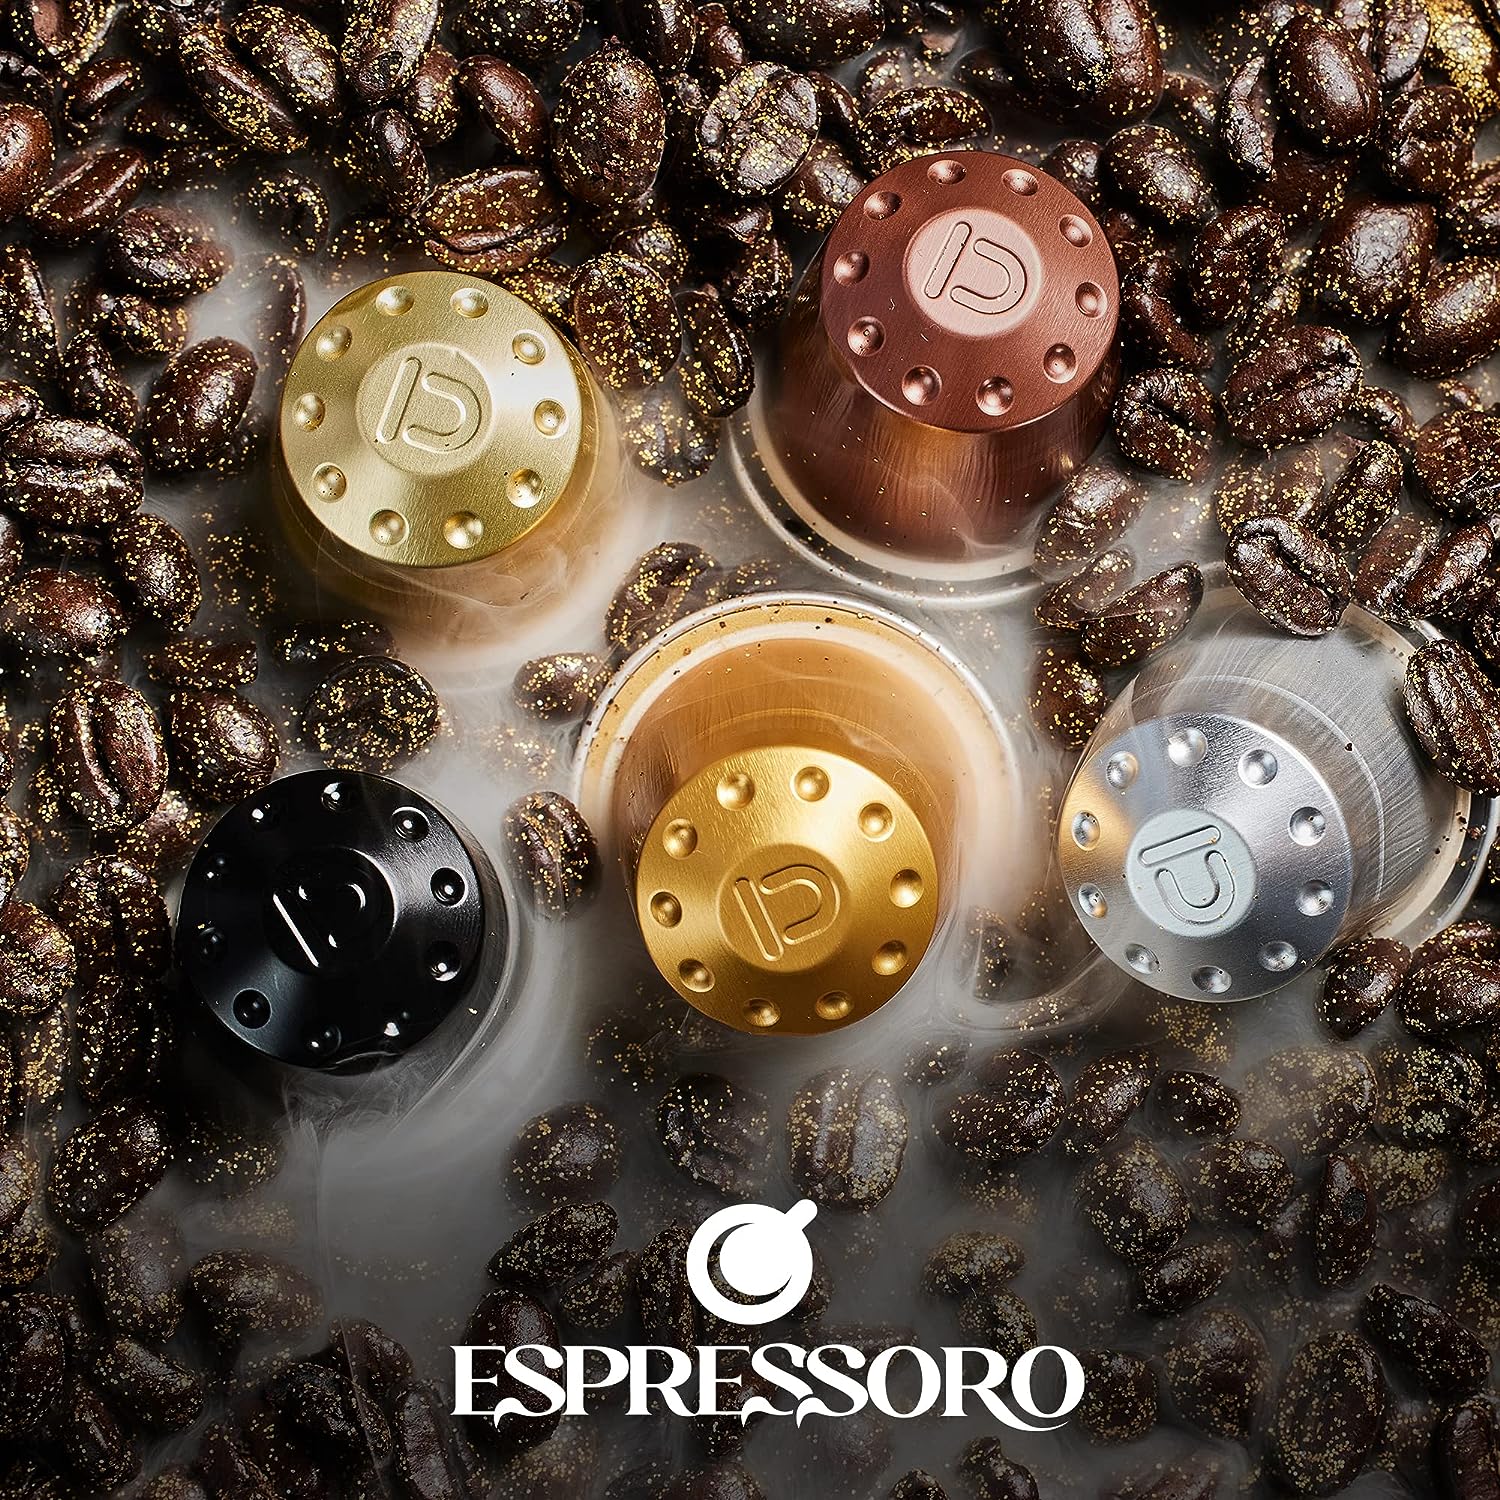 Global brand Nespresso launches new Vertuo line in the Philippines